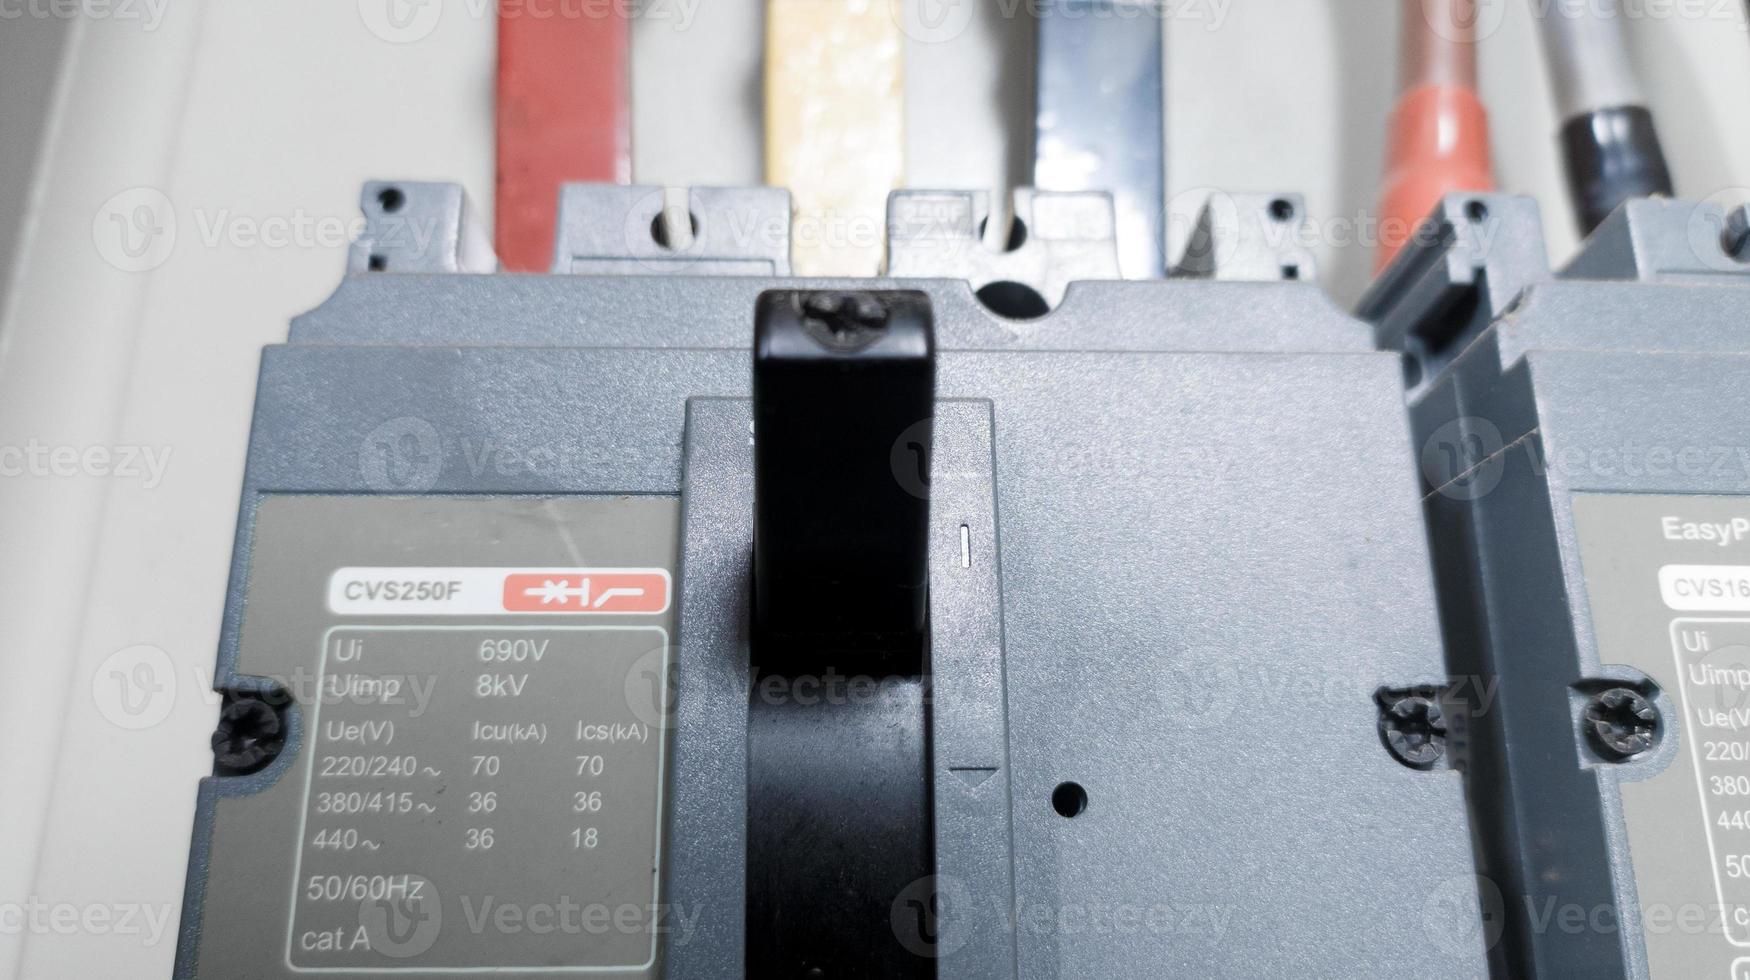 Circuit breakers were installed in main panel distribution high power. photo